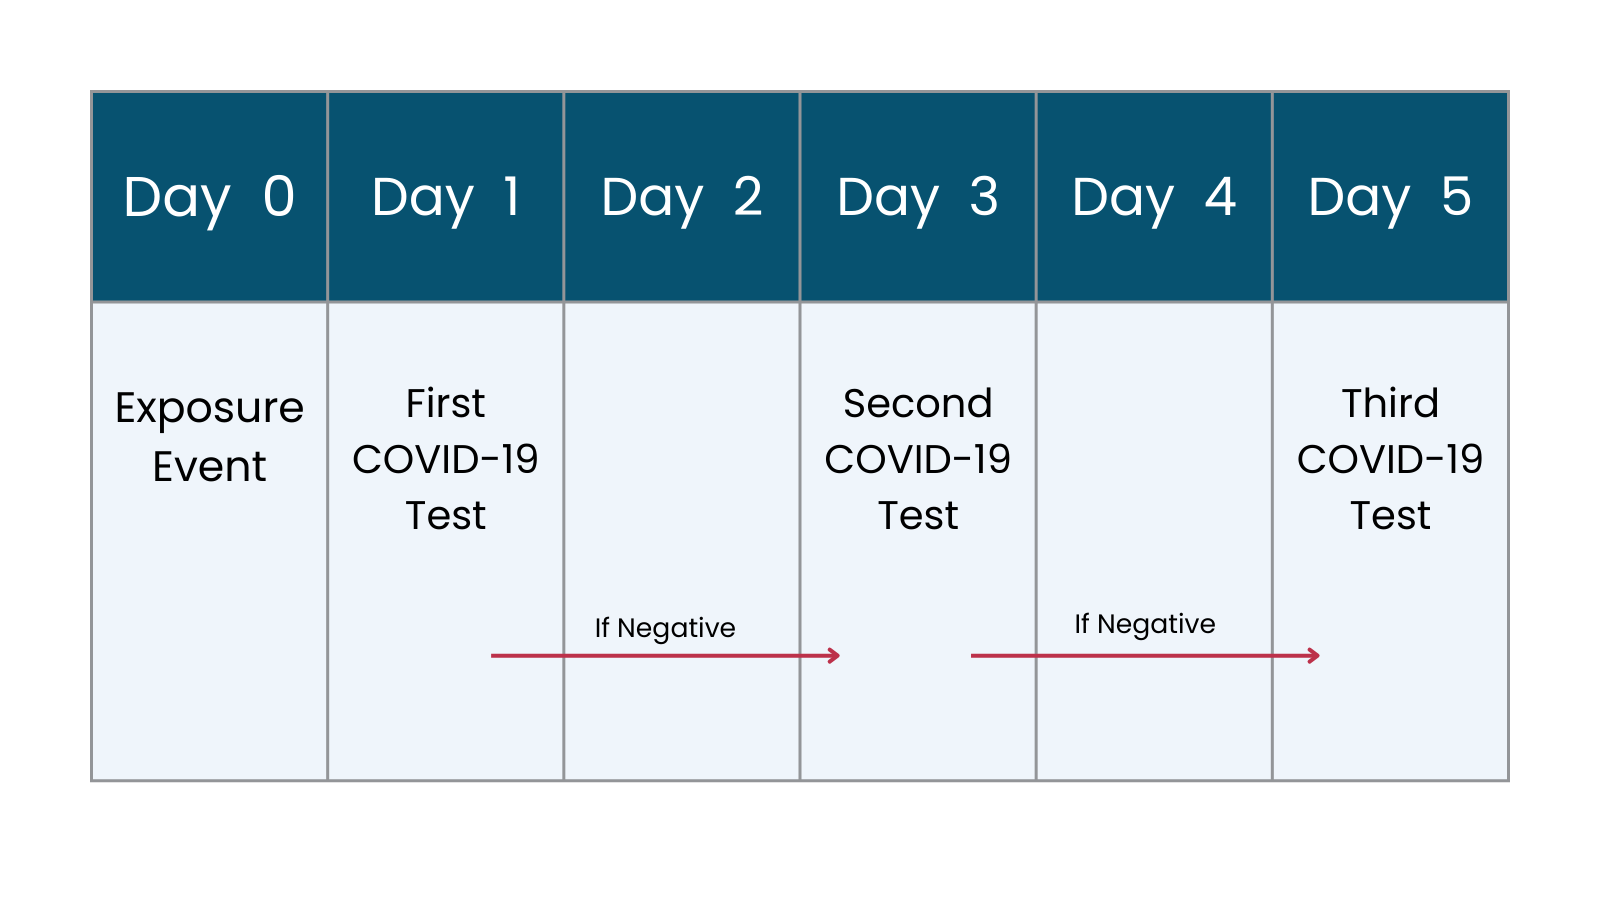 Timeline of COVID-19 testing on days 1, 3, and 5 following an exposure event if the first and second tests are negative.